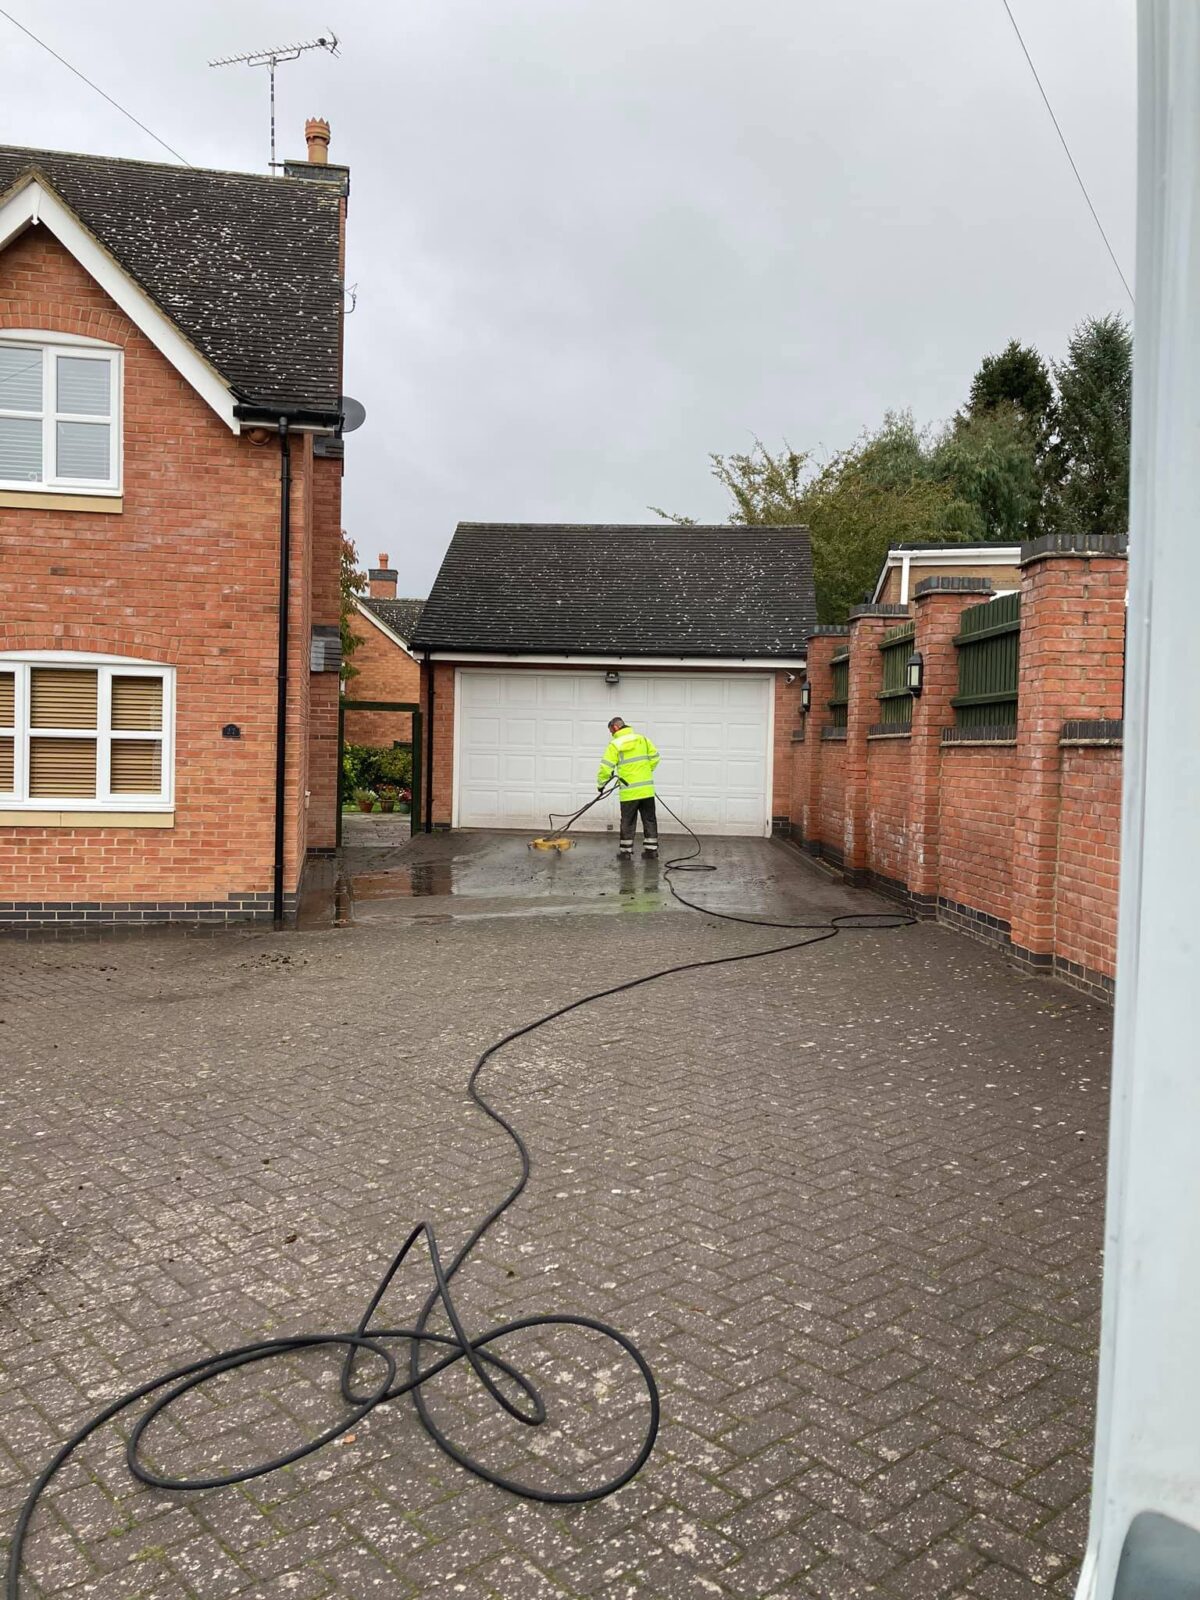 Berryhill Window Cleaning – Providing window cleaning, pressure washing,  and gutter cleaning services